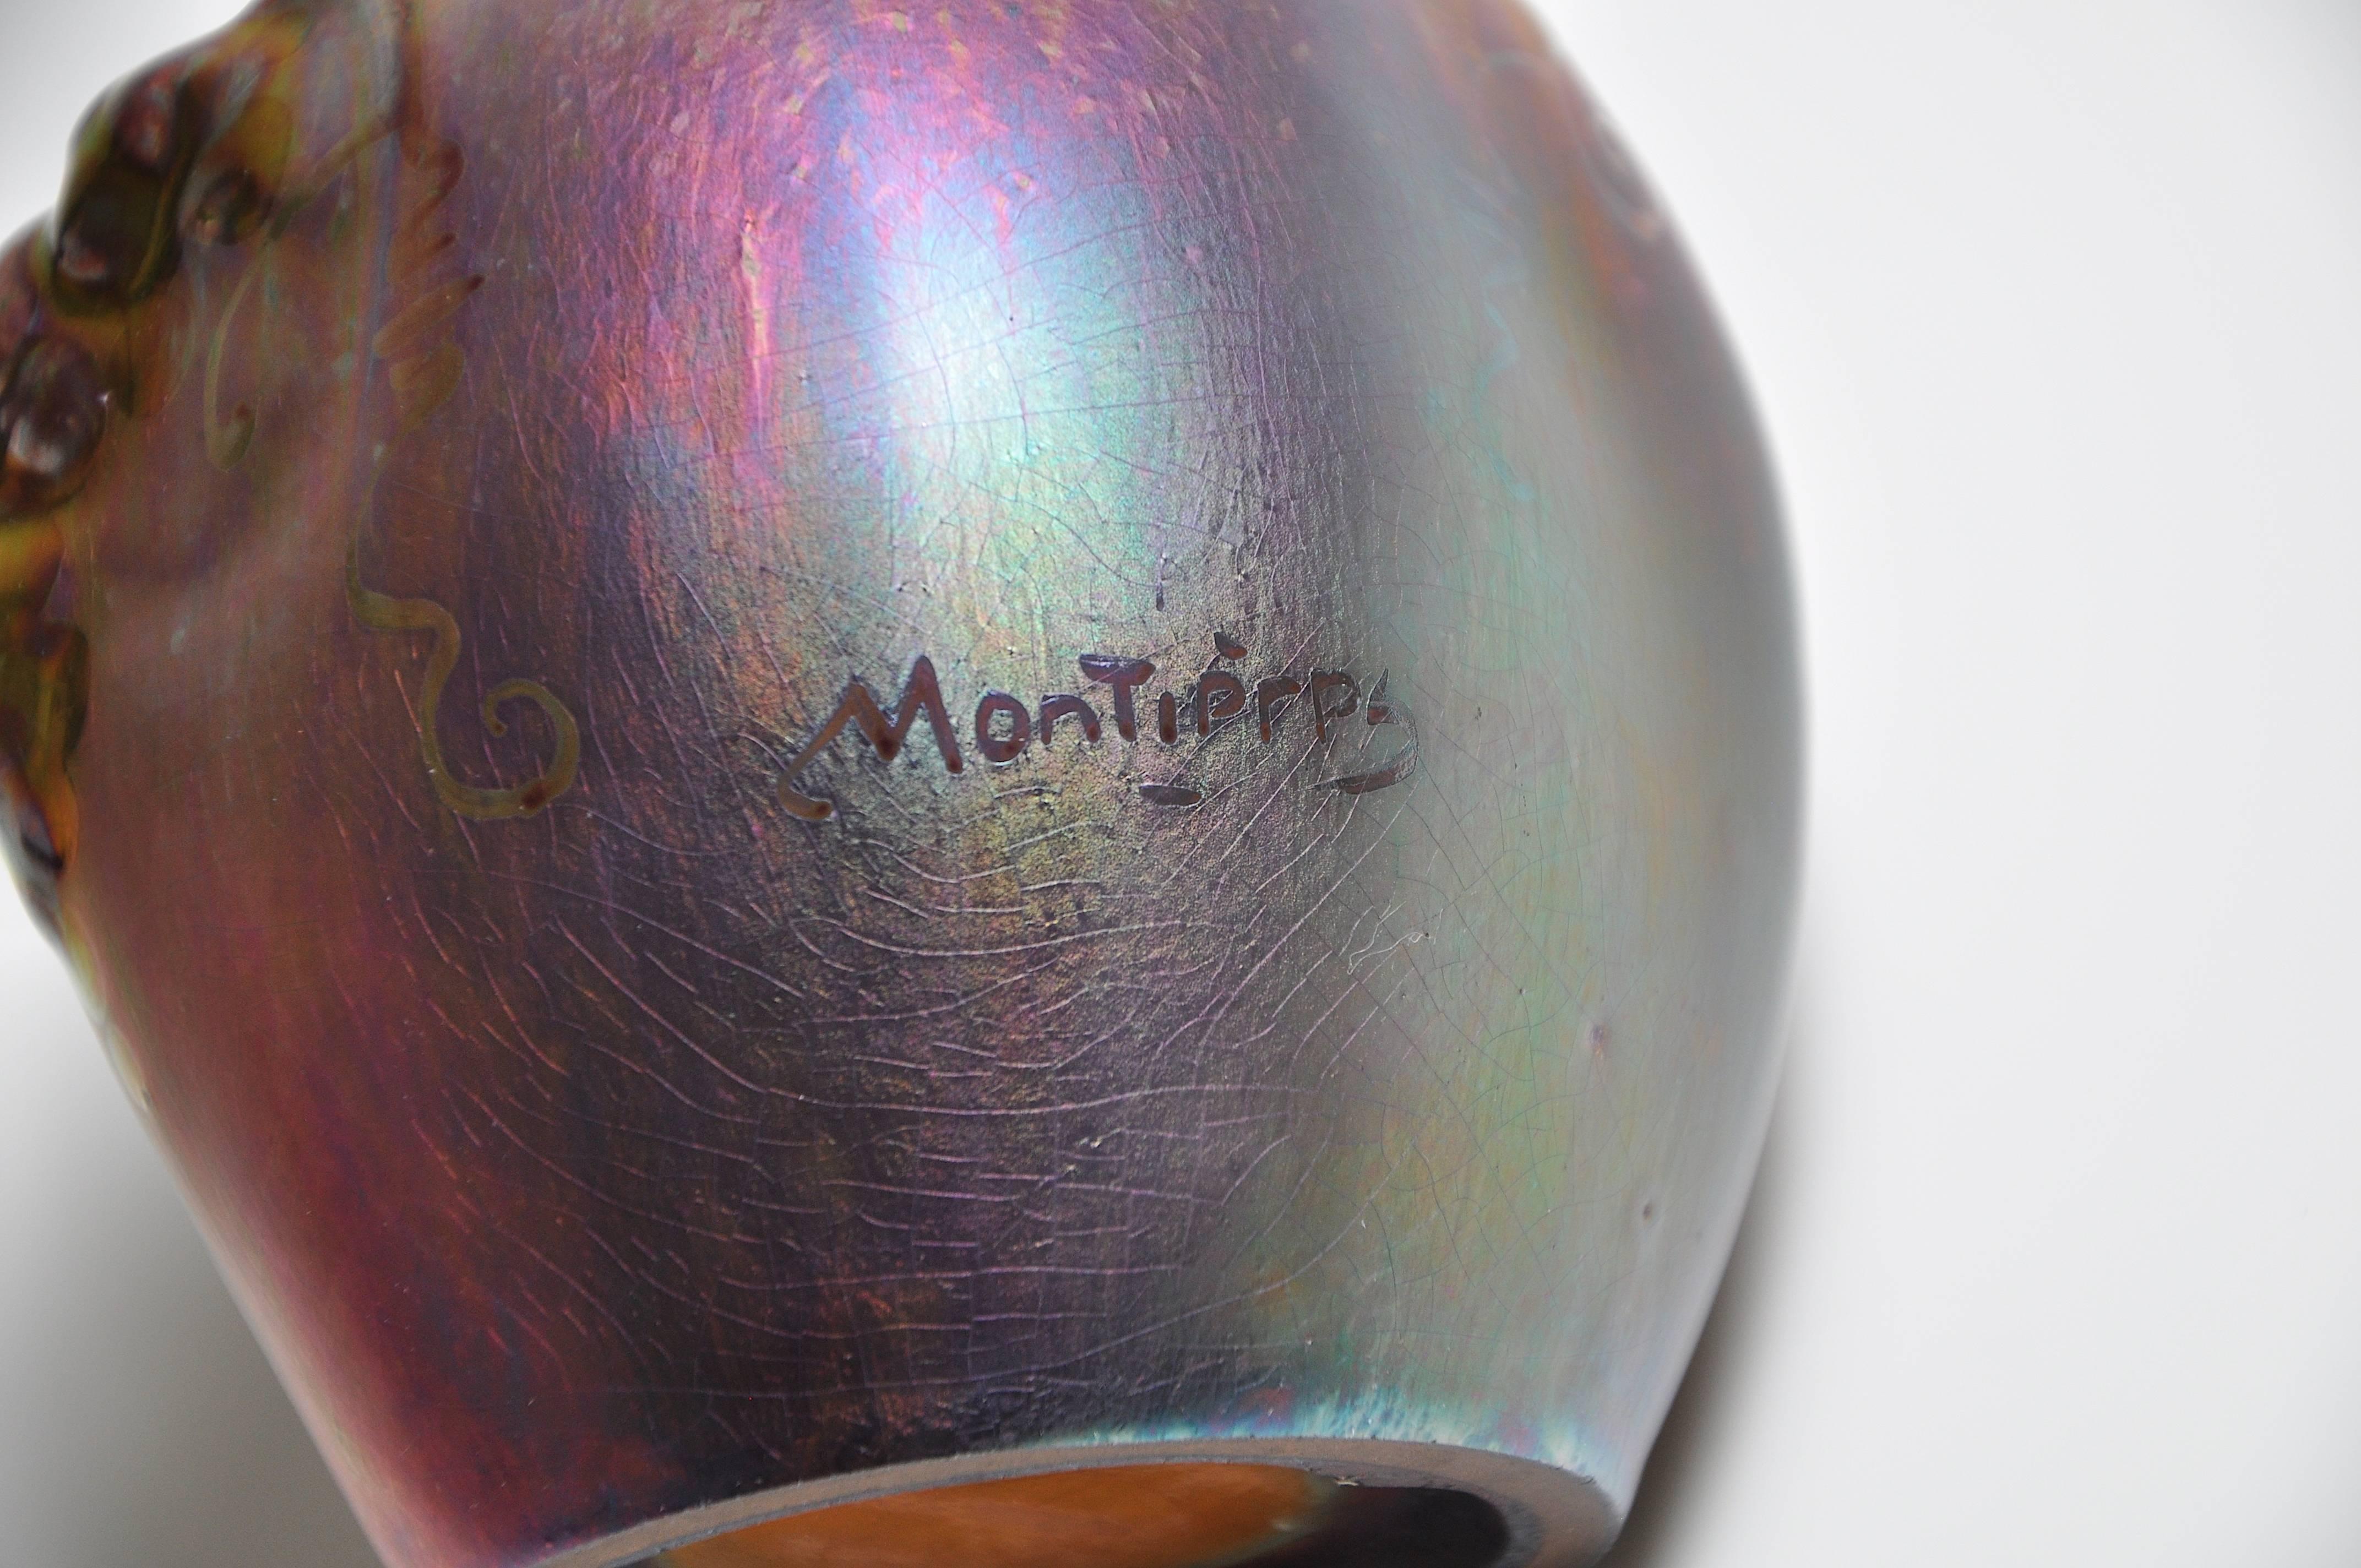 Art Nouveau Art Pottery Montieres red green lustre vase pot.

A superb small iridescent art nouveau vase with a lustre-glazed finish.
It is very tactile, fitting superbly in ones hand like an apple.
Signed ‘Montieres’ by the factory based at